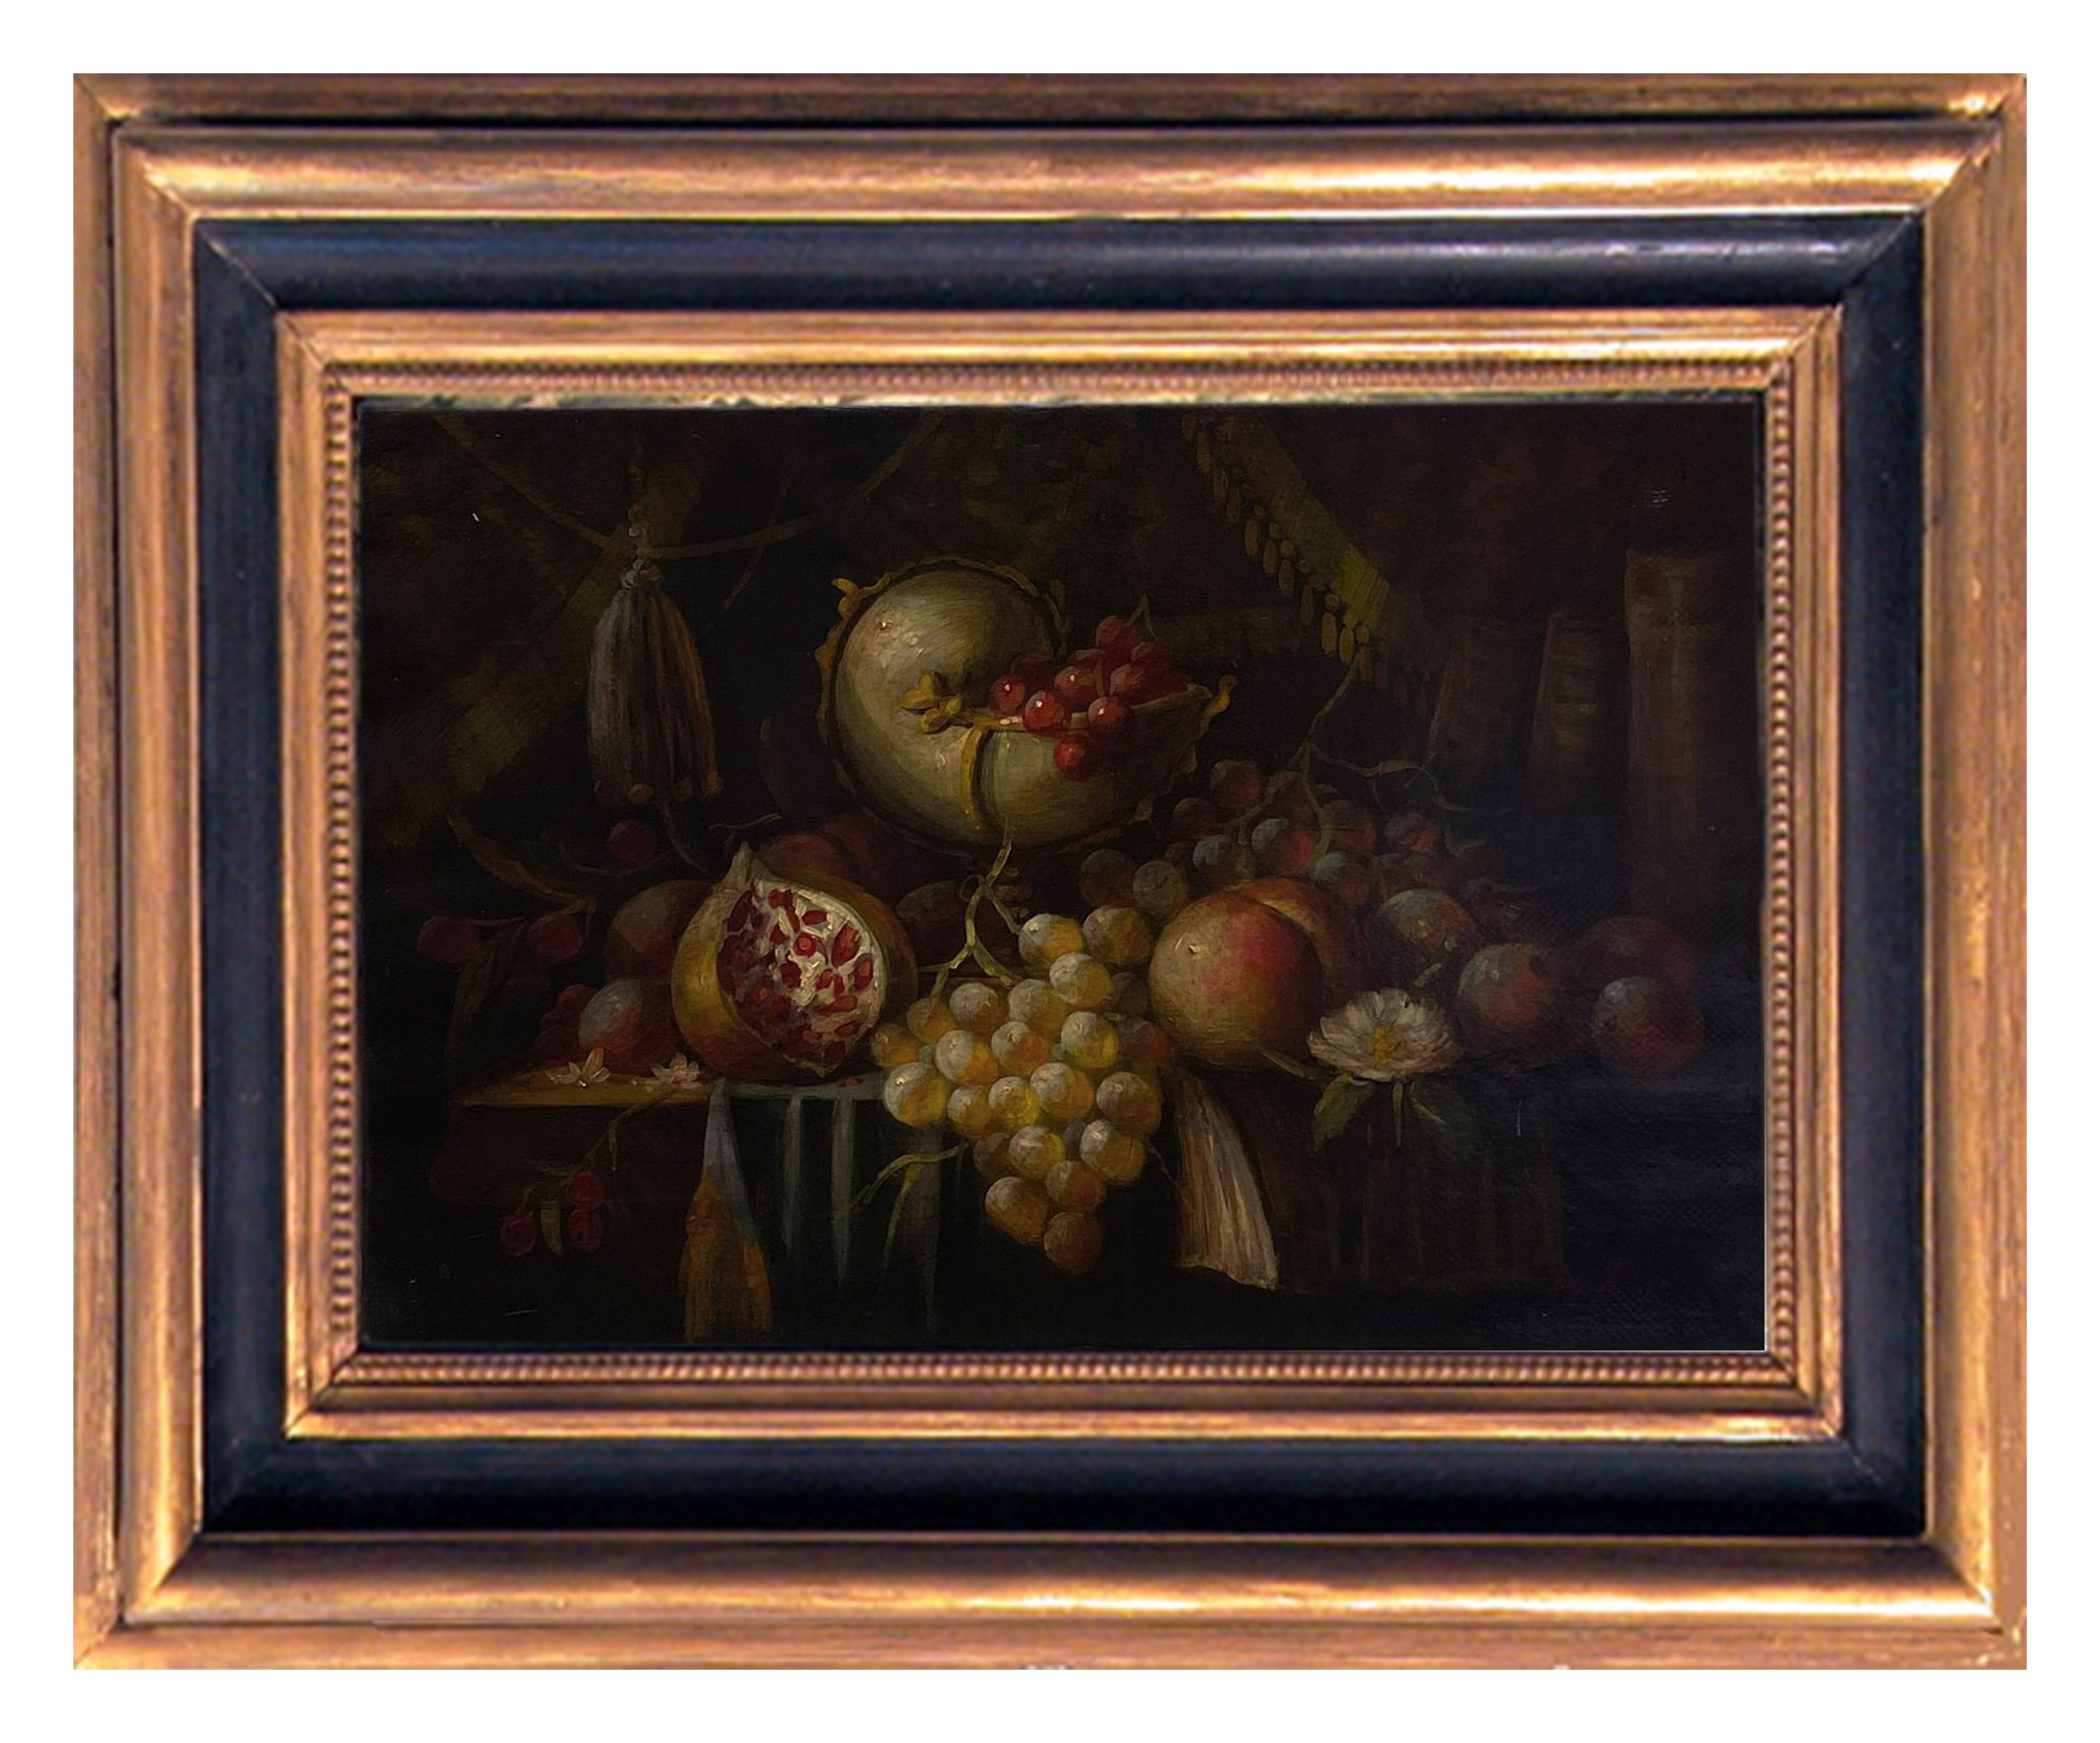 Still life - Massimo Reggiani Italia 2005 - Oil on canvas cm.35x50
The origins of still life can be found in Dutch painting. At the beginning of Dutch painting, artists included additional elements in their religious compositions, depicting them in